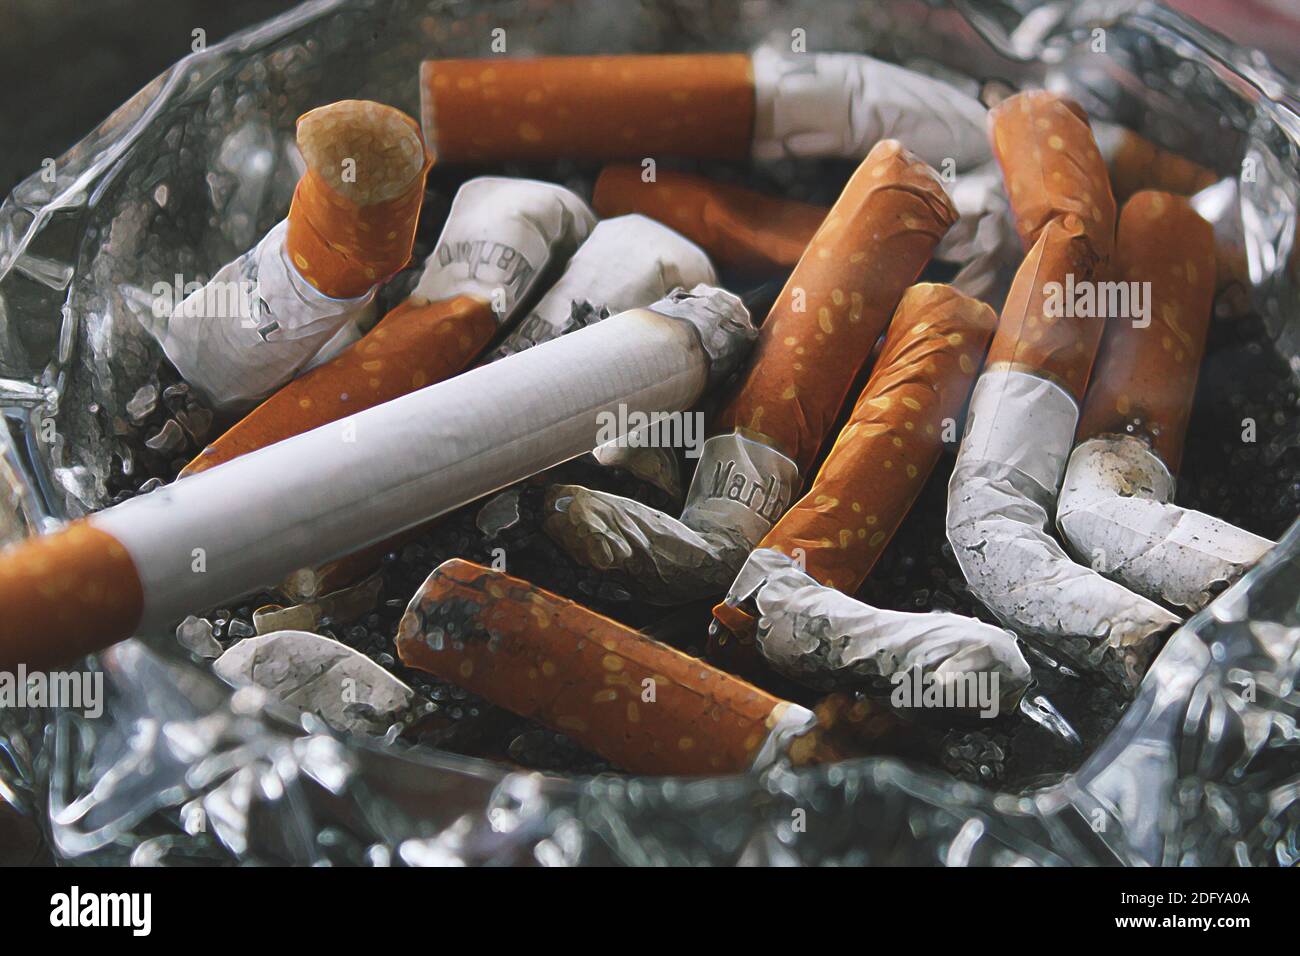 close-up of an ashtray full of cigarettes Stock Photo